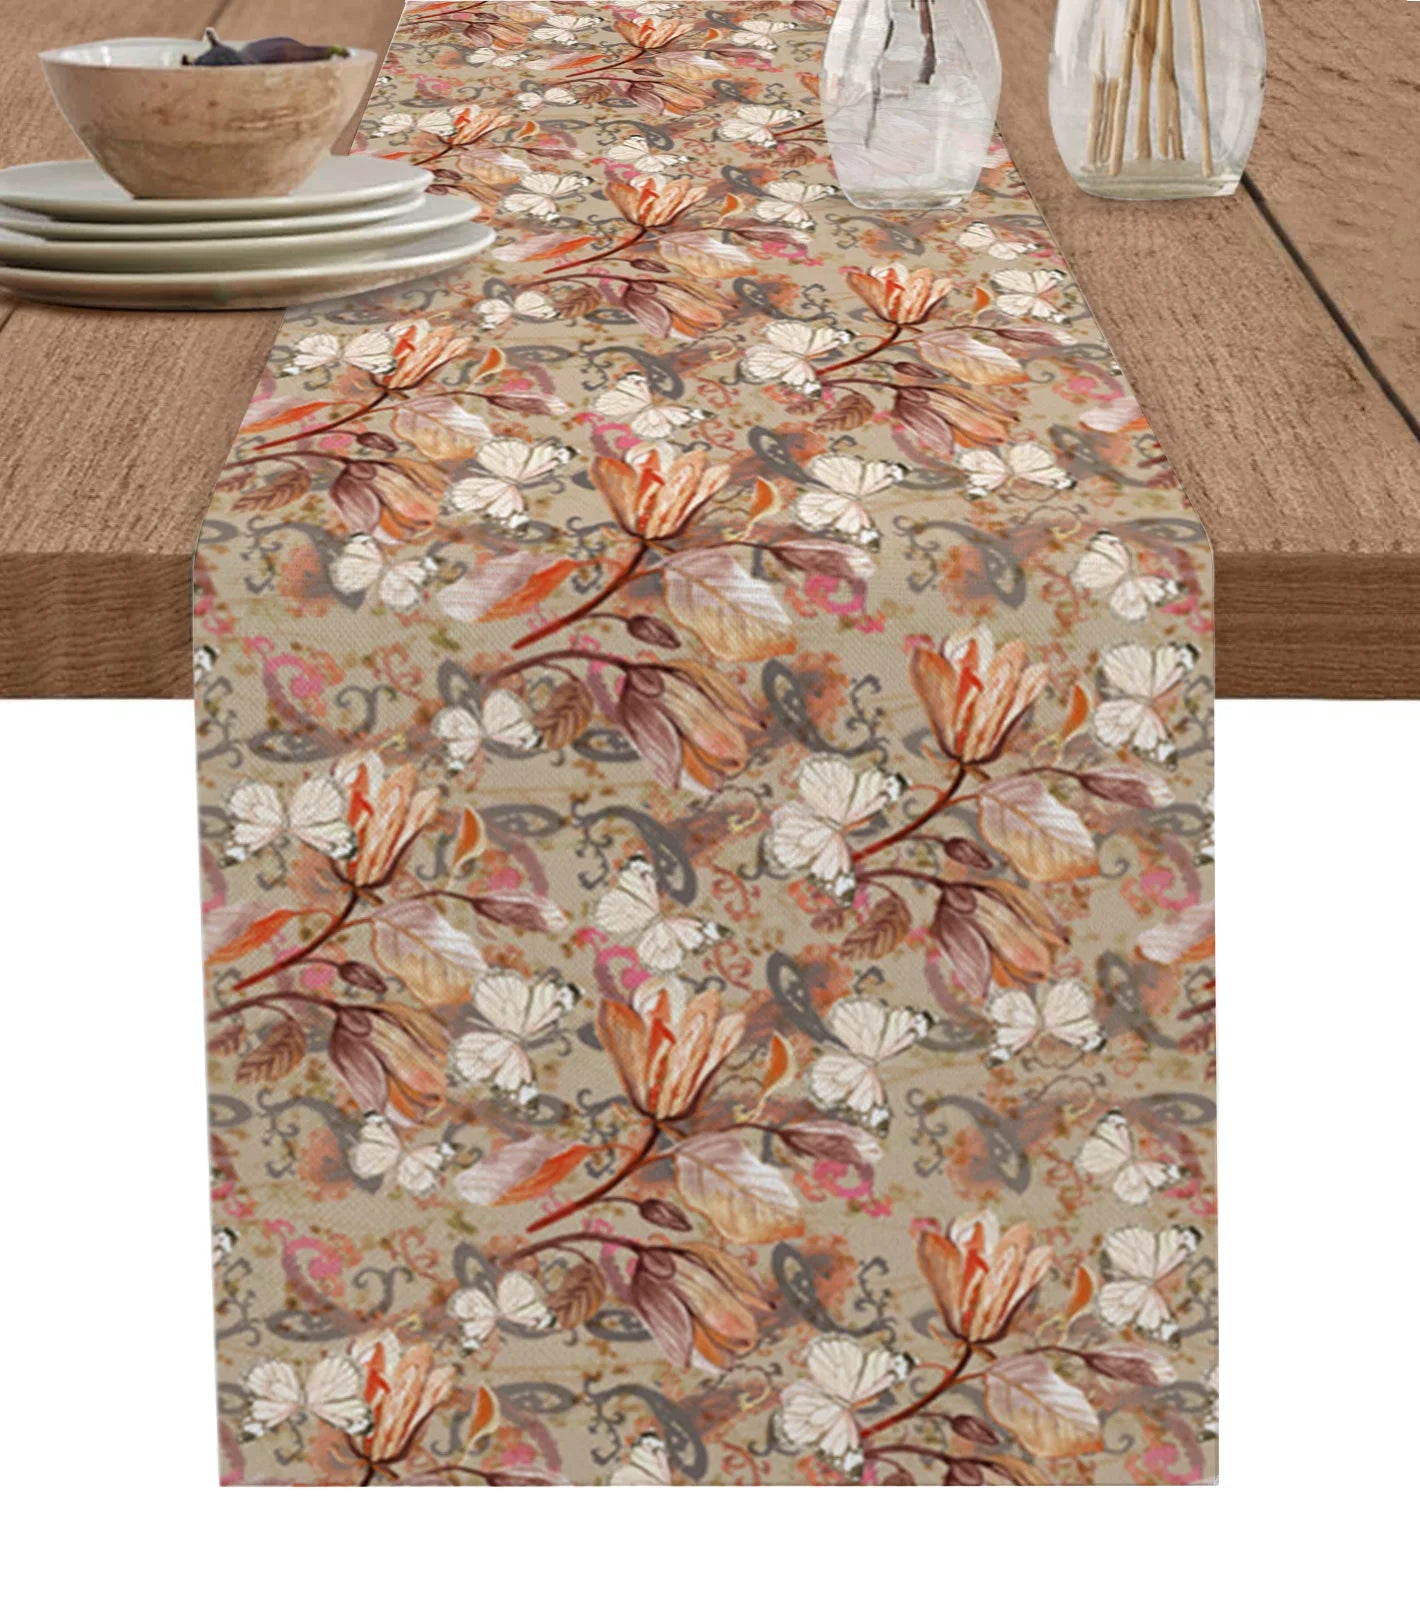 Table runner decoration with antique flower and butterfly leaves, suitable for home decor and dinner table decoration.